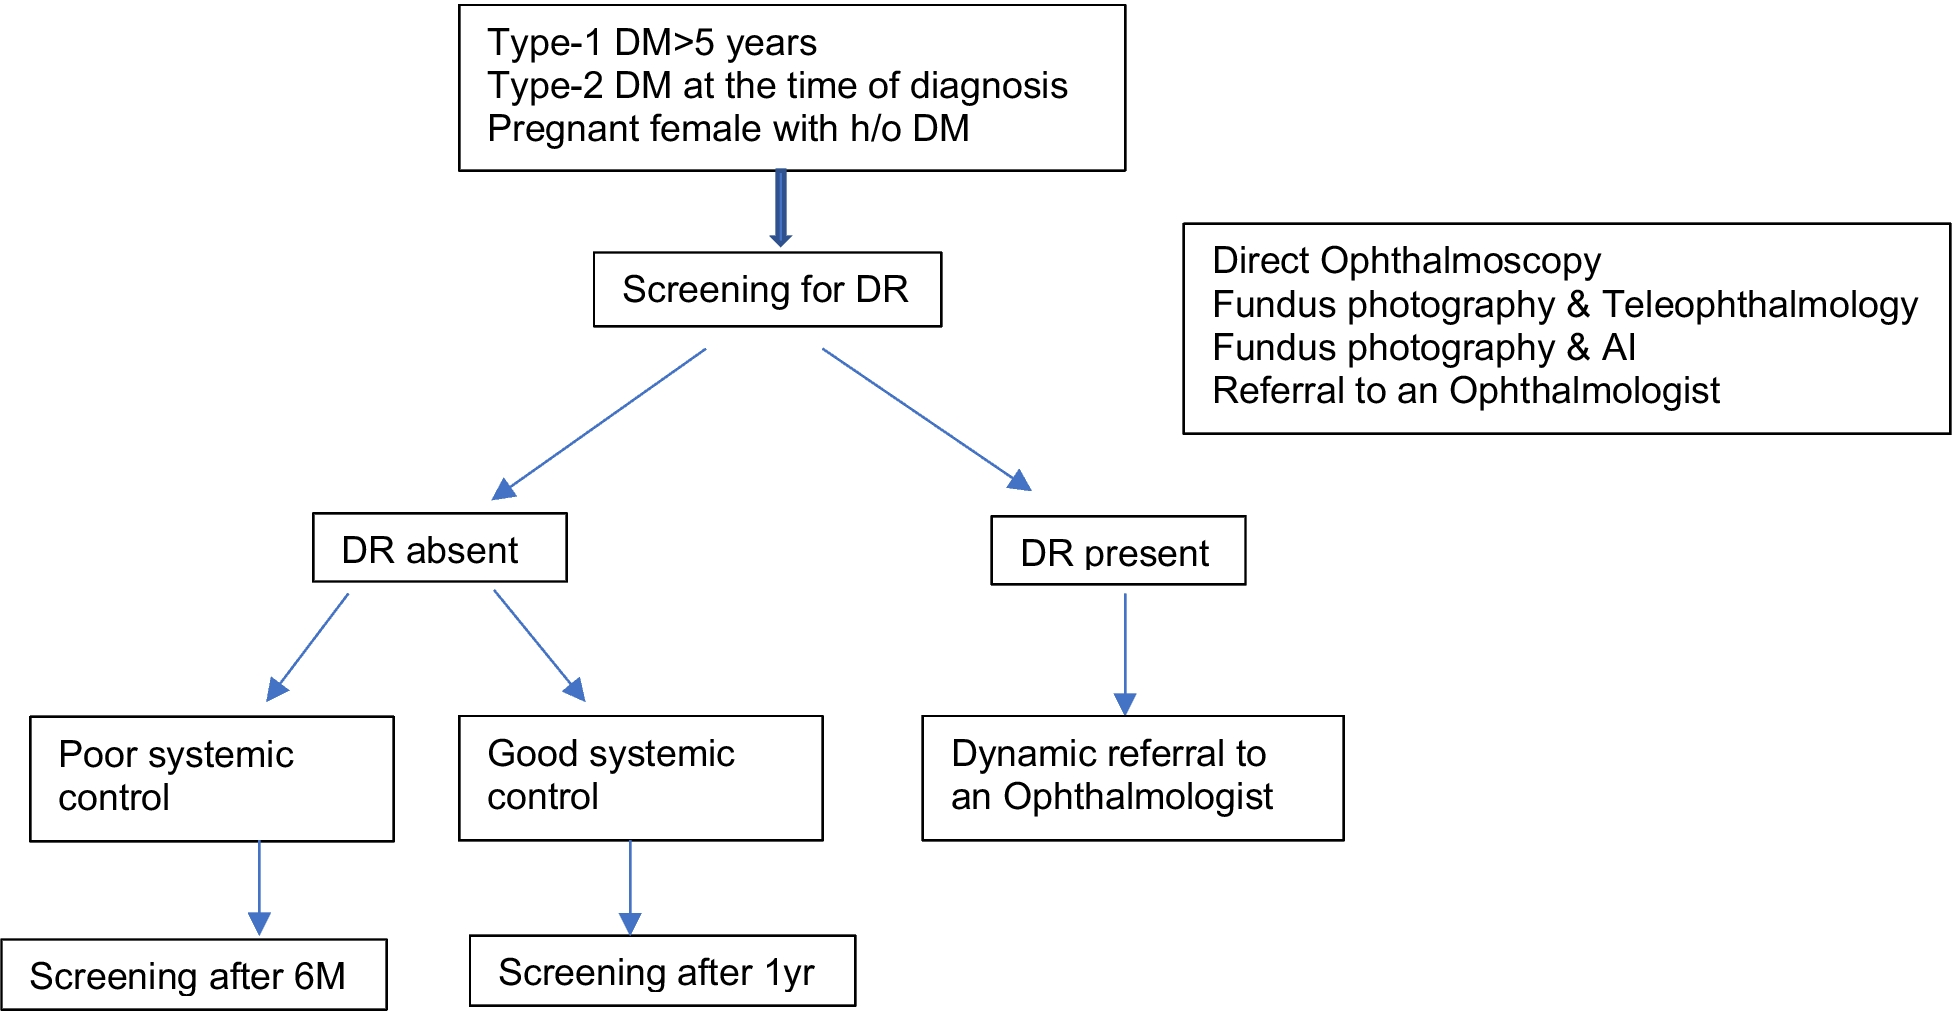 Diabetic retinopathy screening guidelines for Physicians in India: position statement by the Research Society for the Study of Diabetes in India (RSSDI) and the Vitreoretinal Society of India (VRSI)-2023